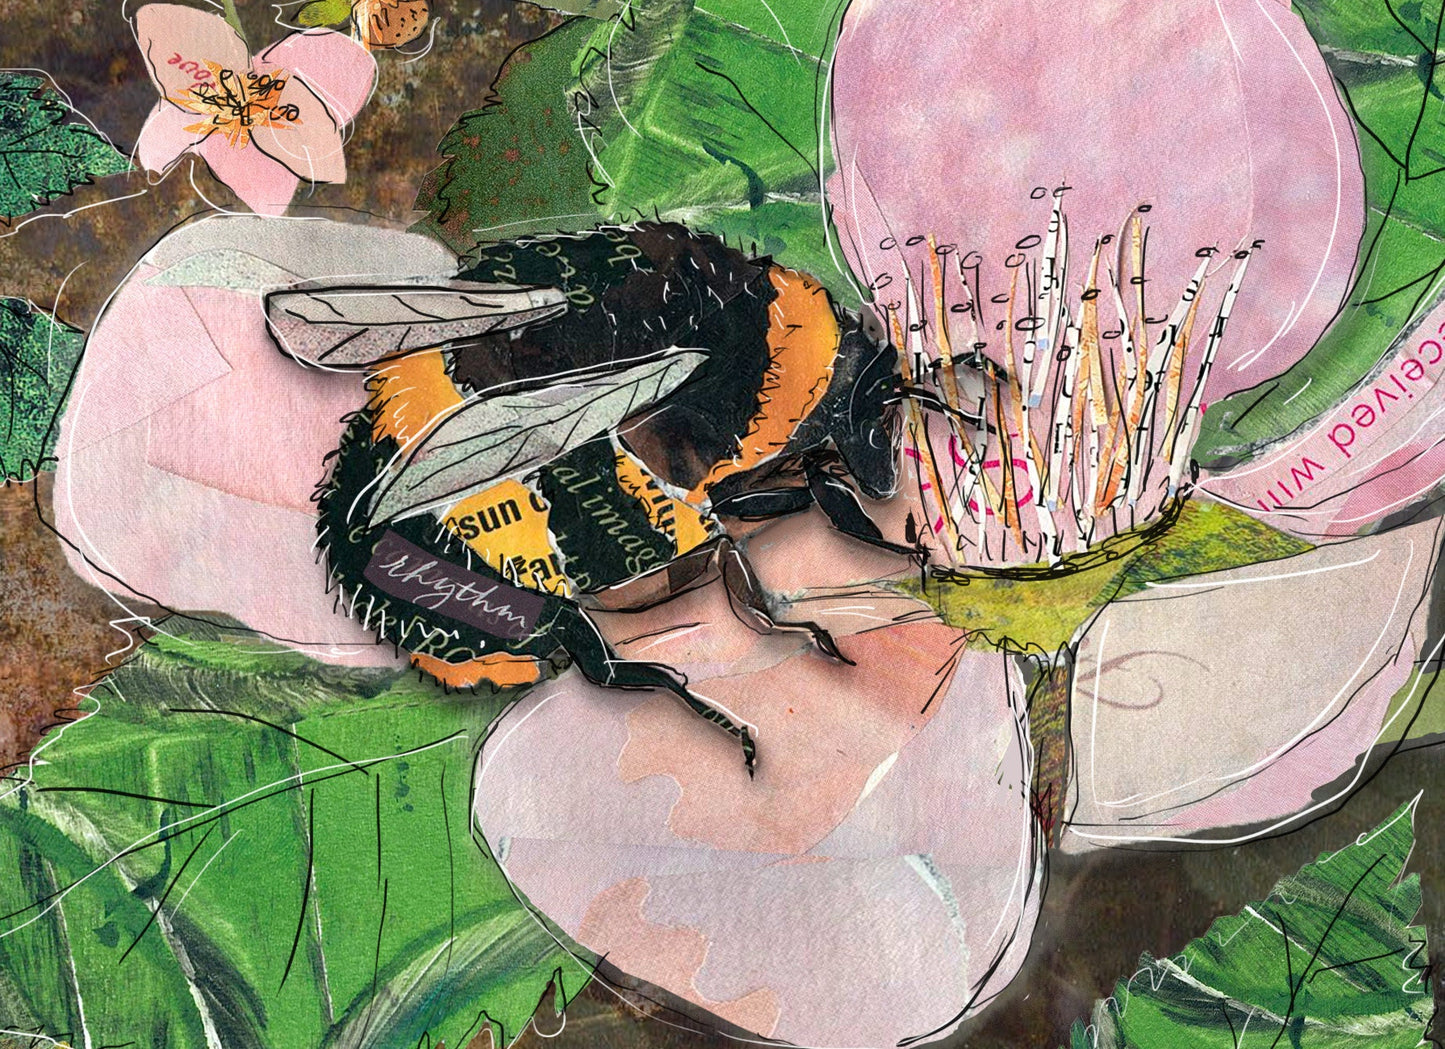 Greeting Card of a mixed media collage of bumble bee pollenating blackberry flowers, frog hiding among leaves - blank inside